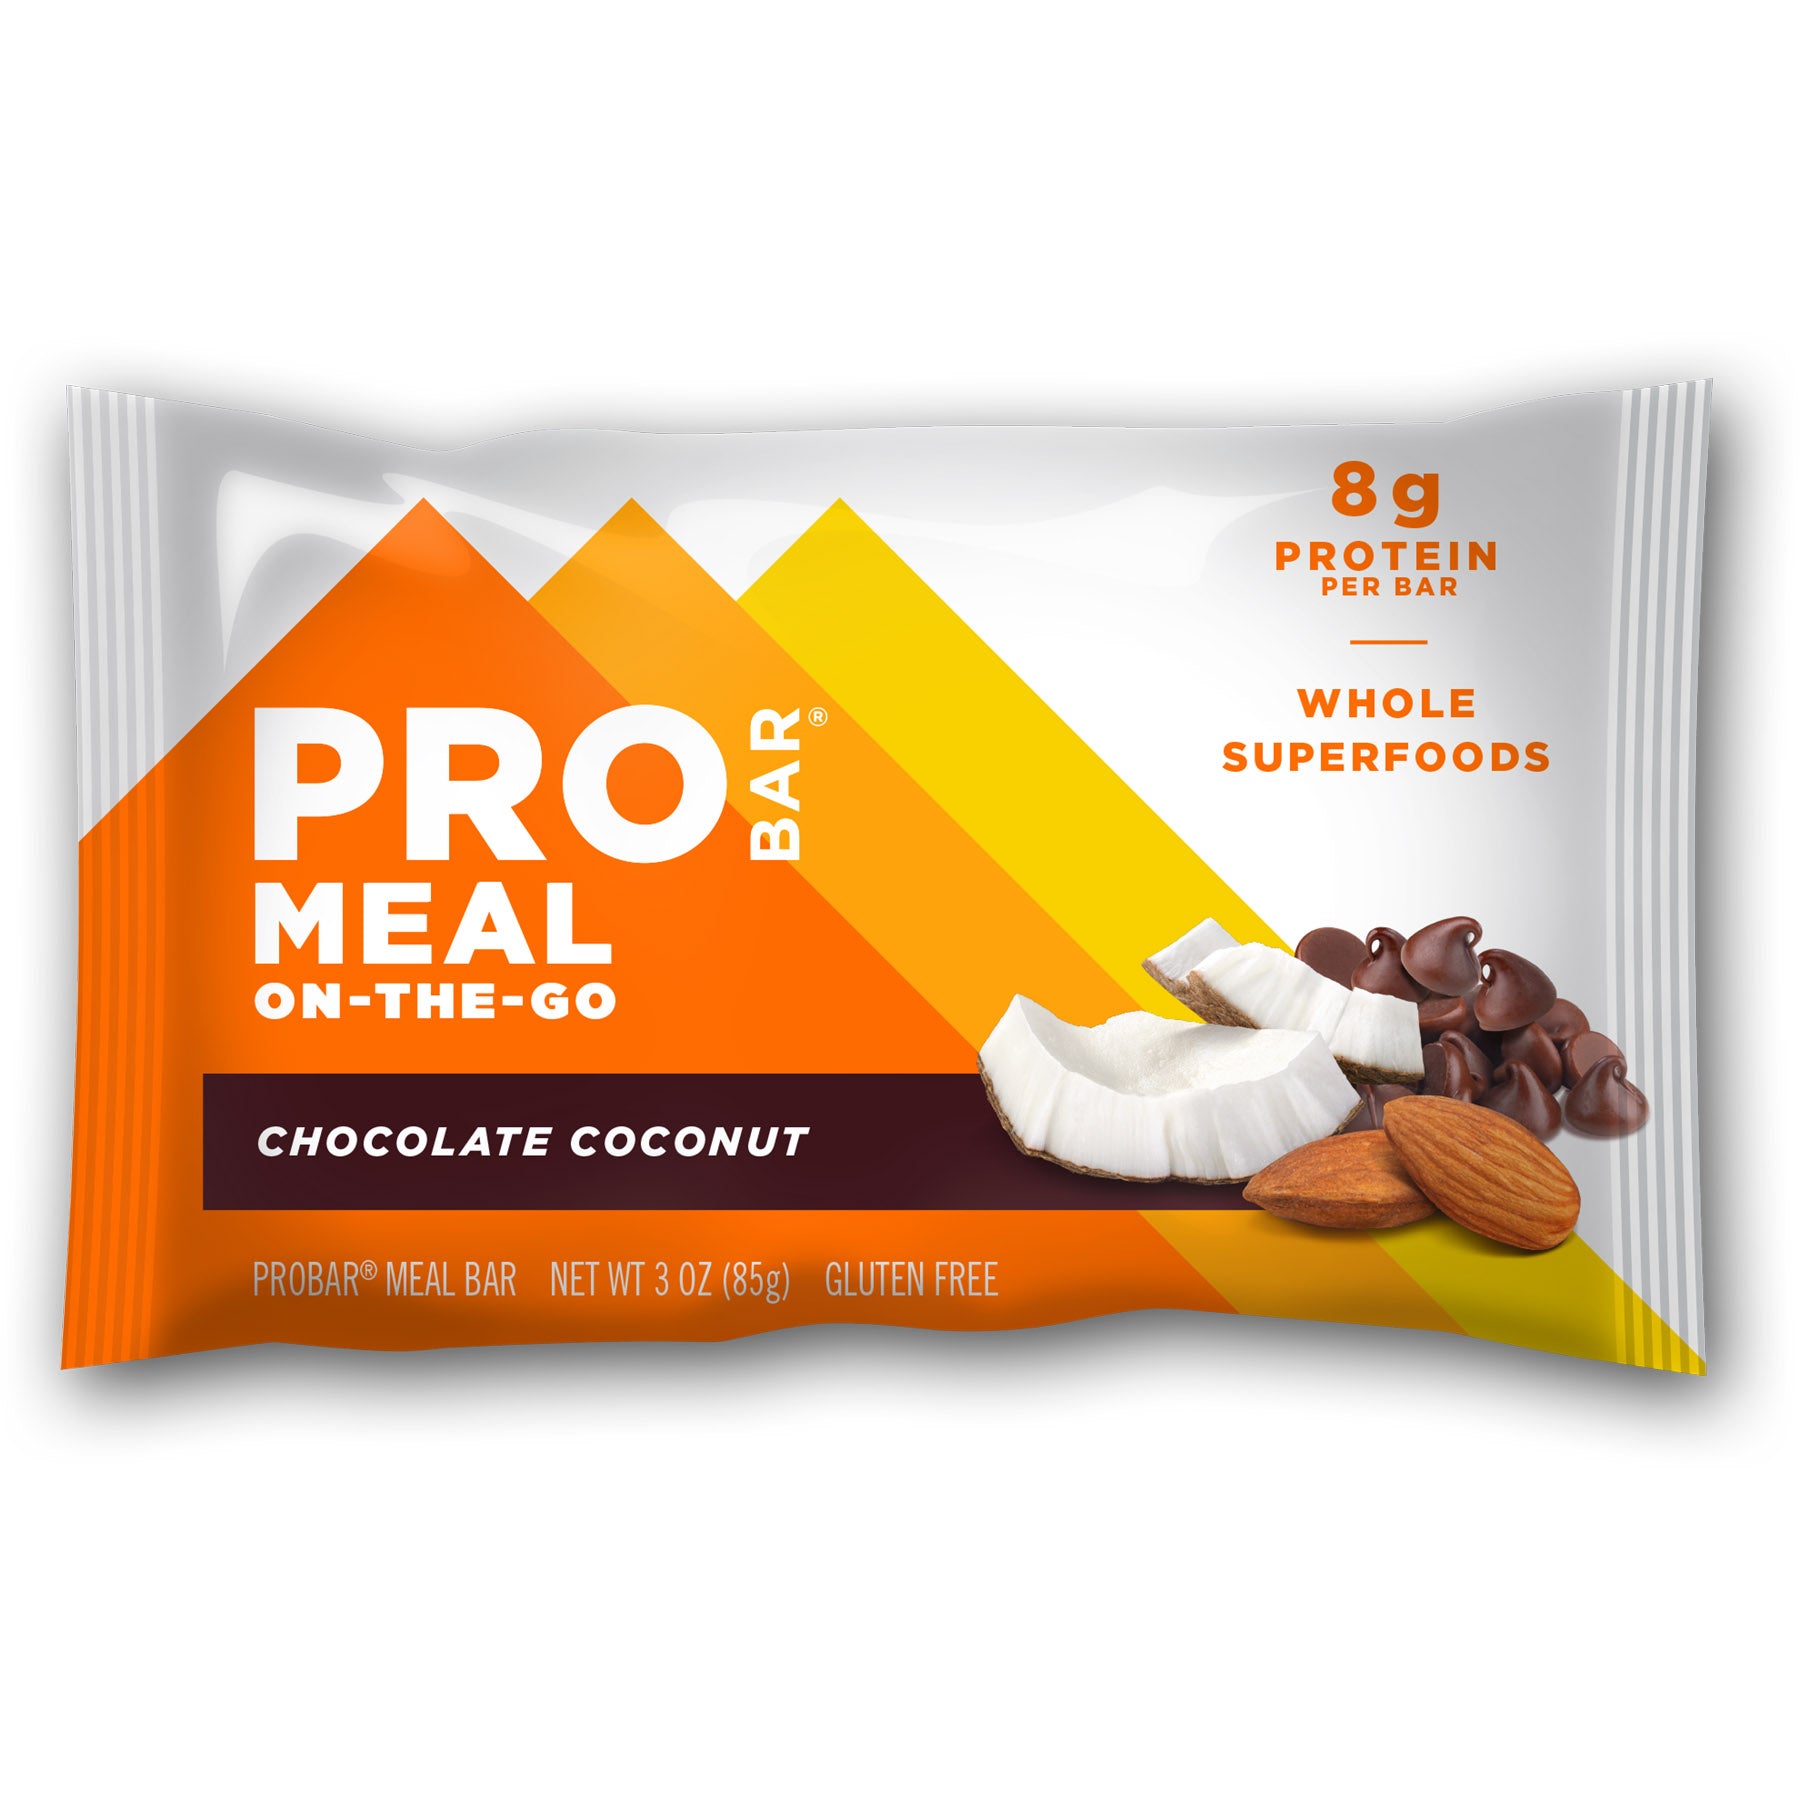 The front of the probar chocolate coconut bar